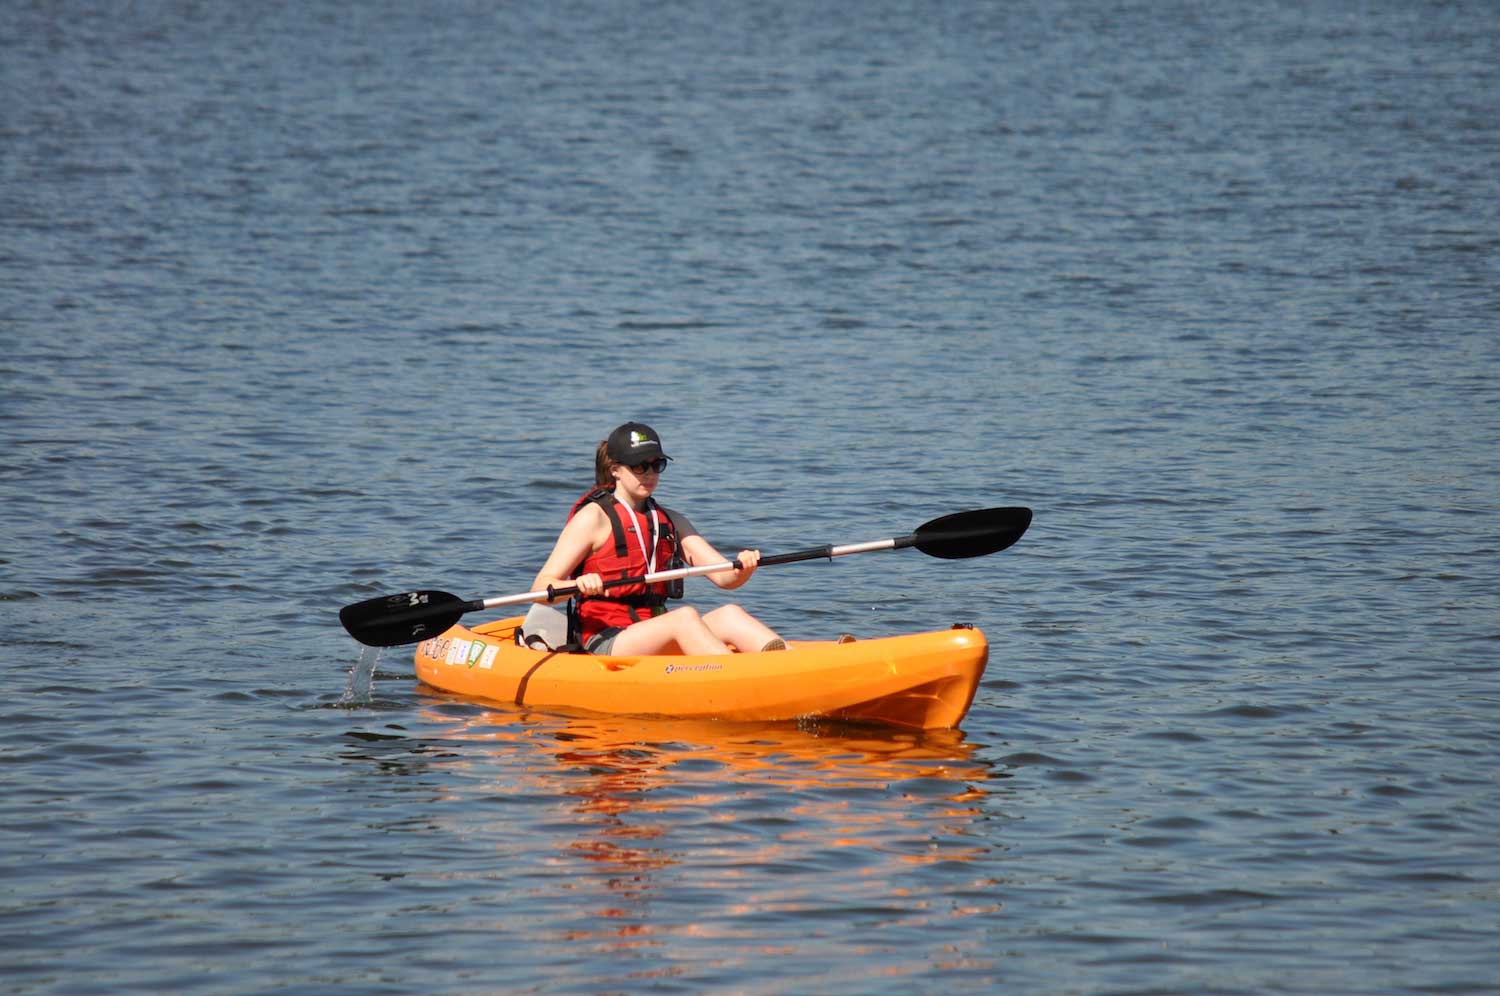 A woman paddling a kayak over the water.